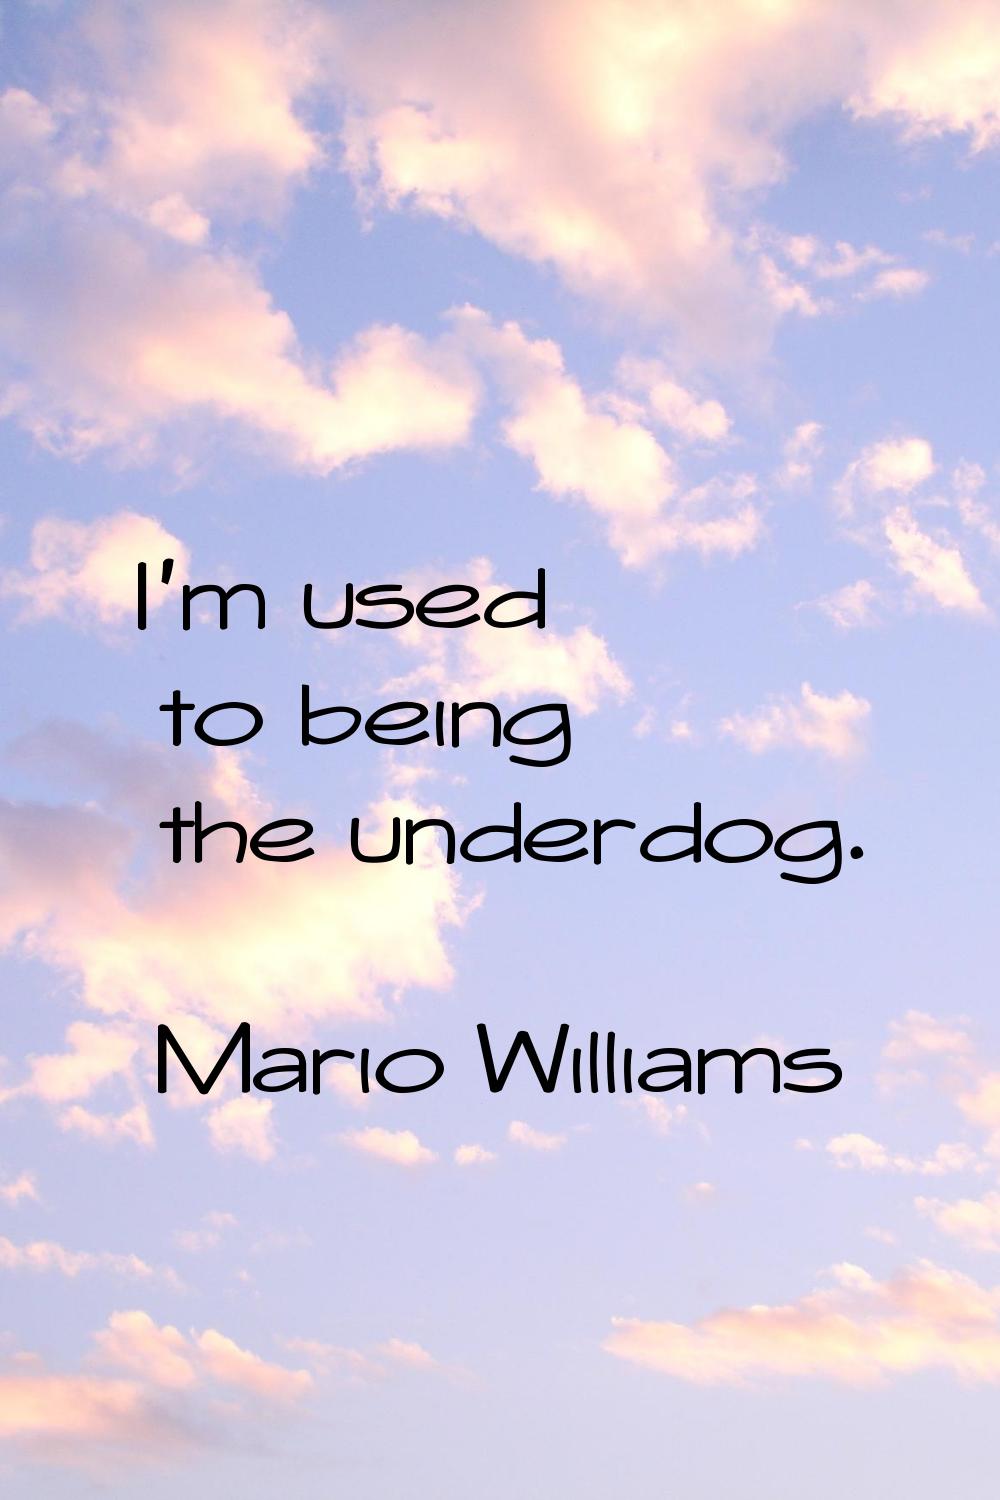 I'm used to being the underdog.